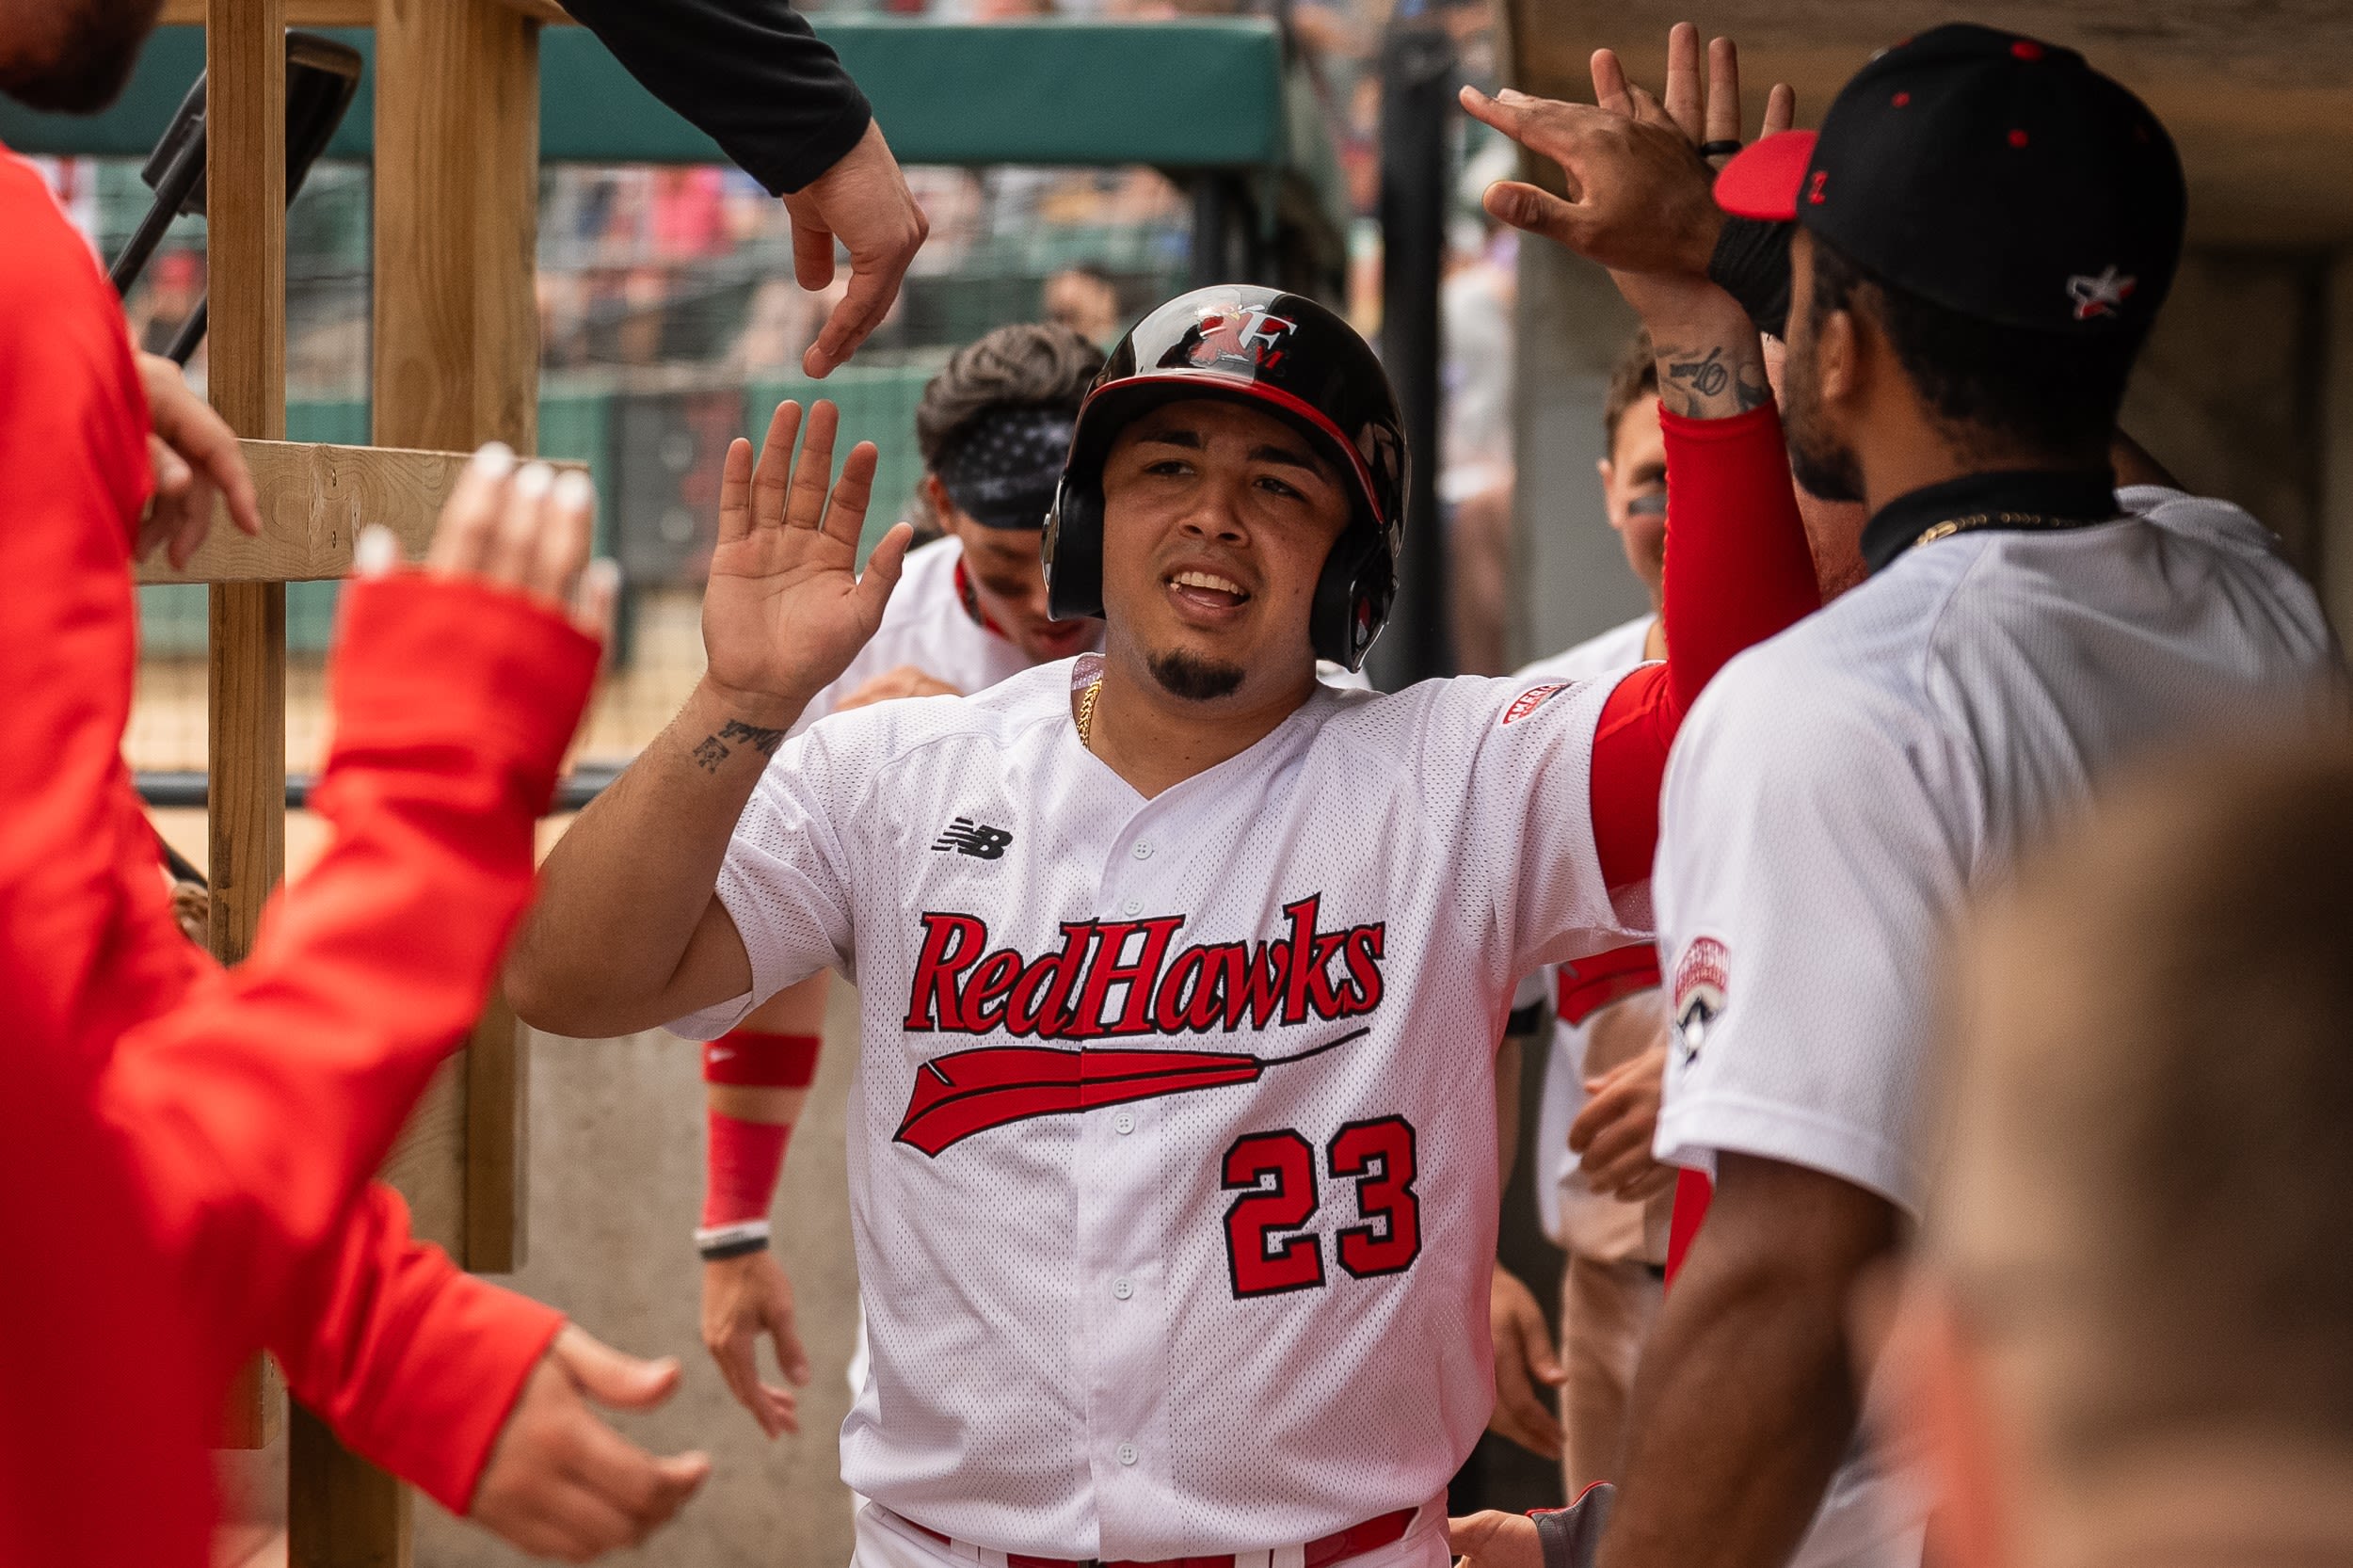 Super 6: RedHawks' Fernandez delivers recording-tying hit performance with family in attendance